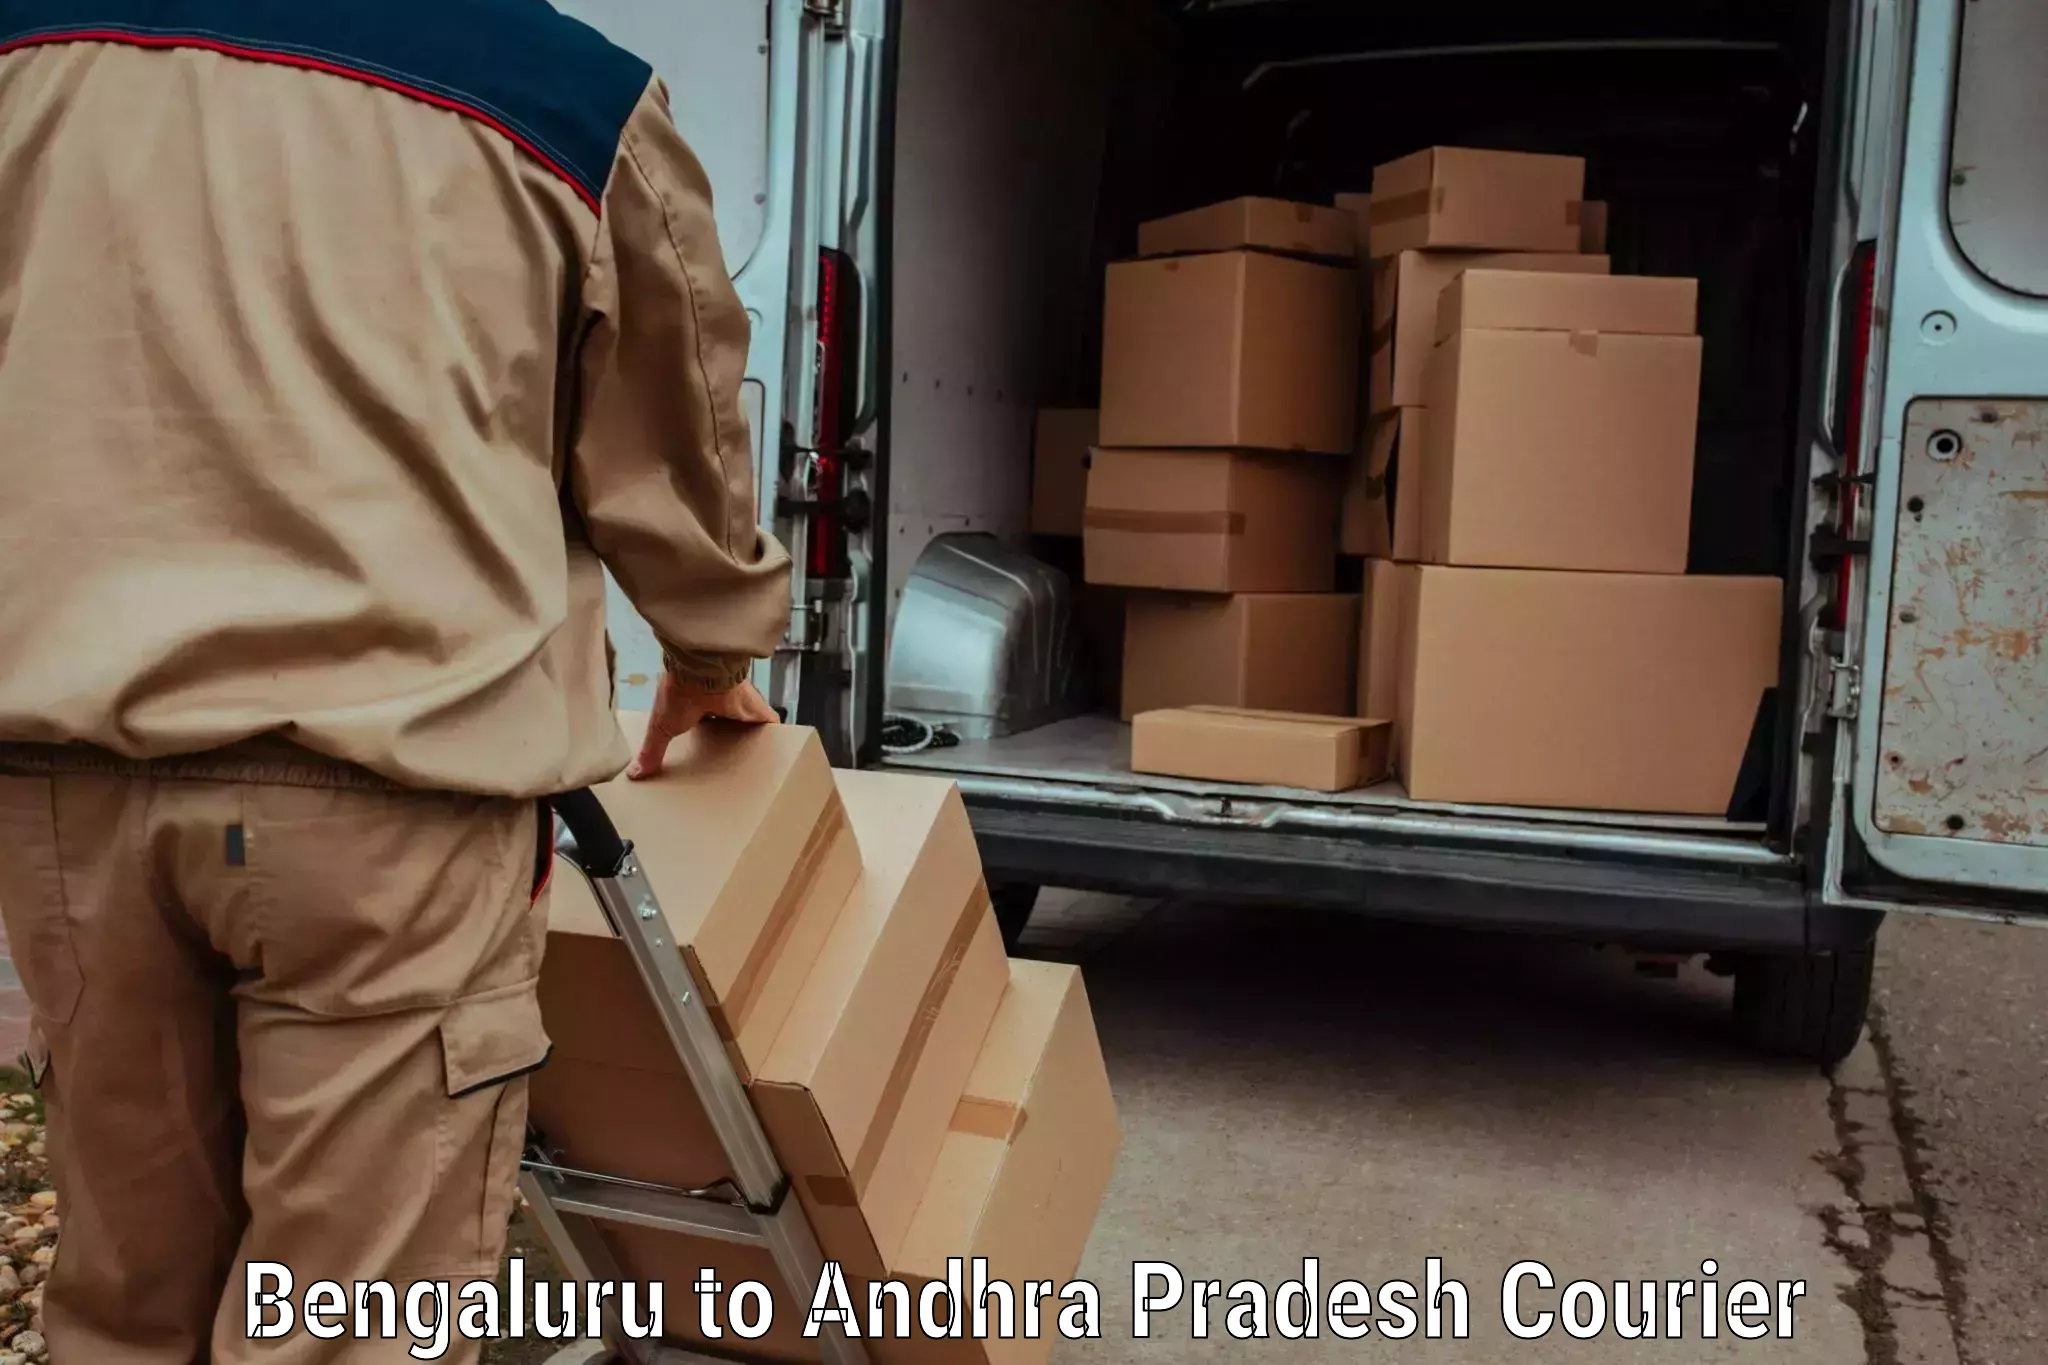 Express delivery network Bengaluru to Chirala